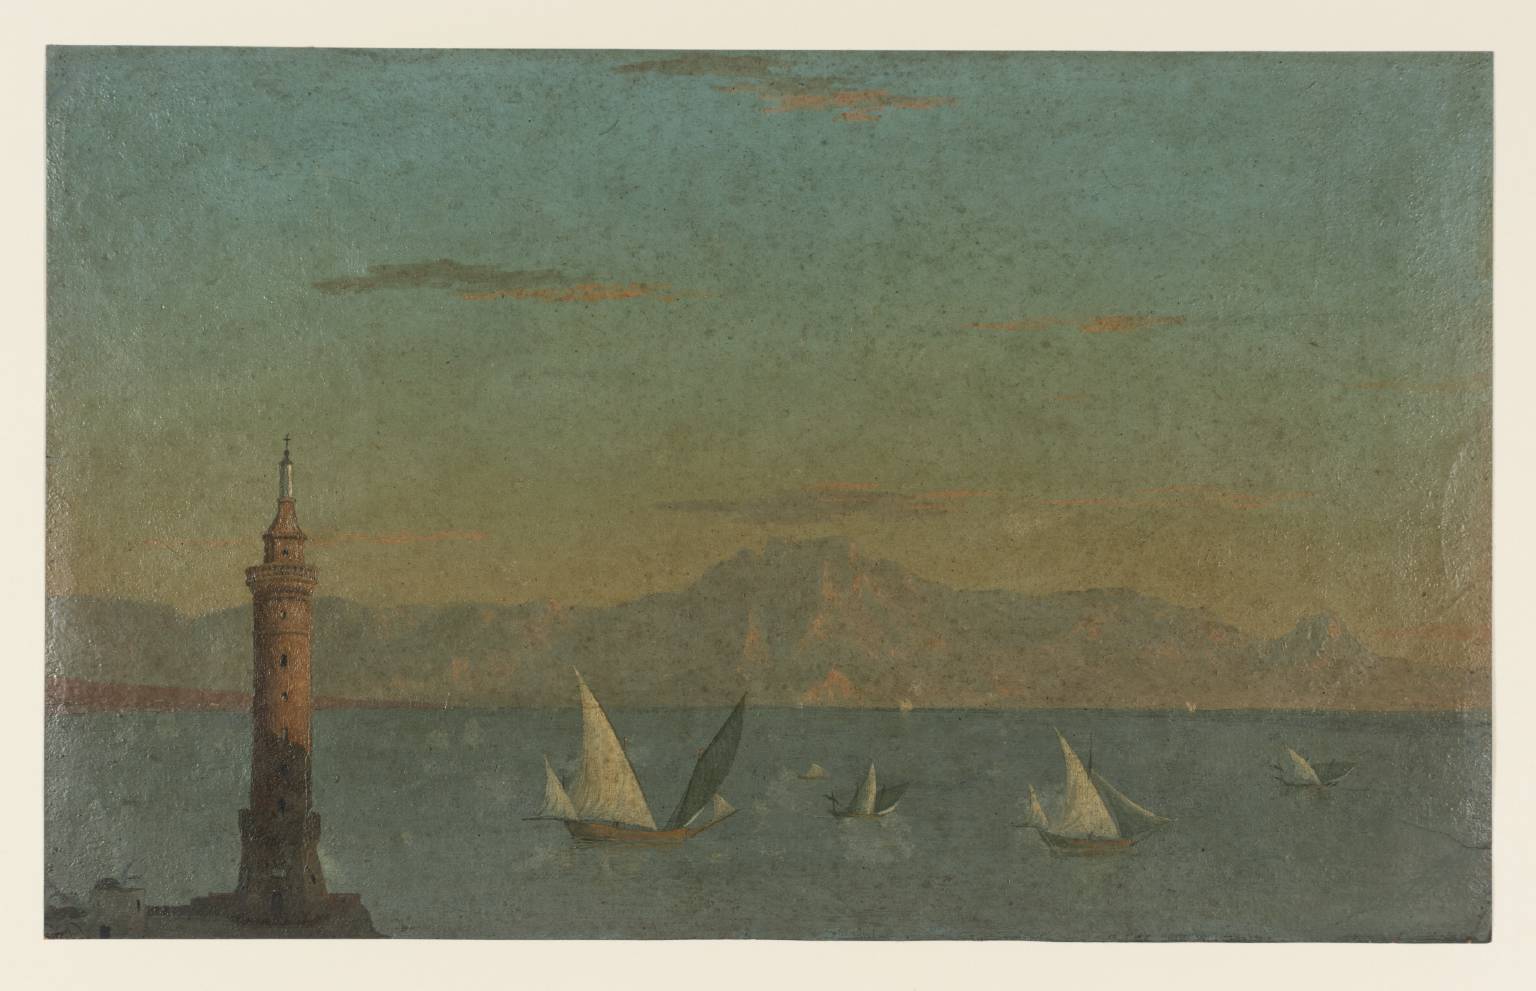 T08246: The Bay of Naples and the Mole Lighthouse